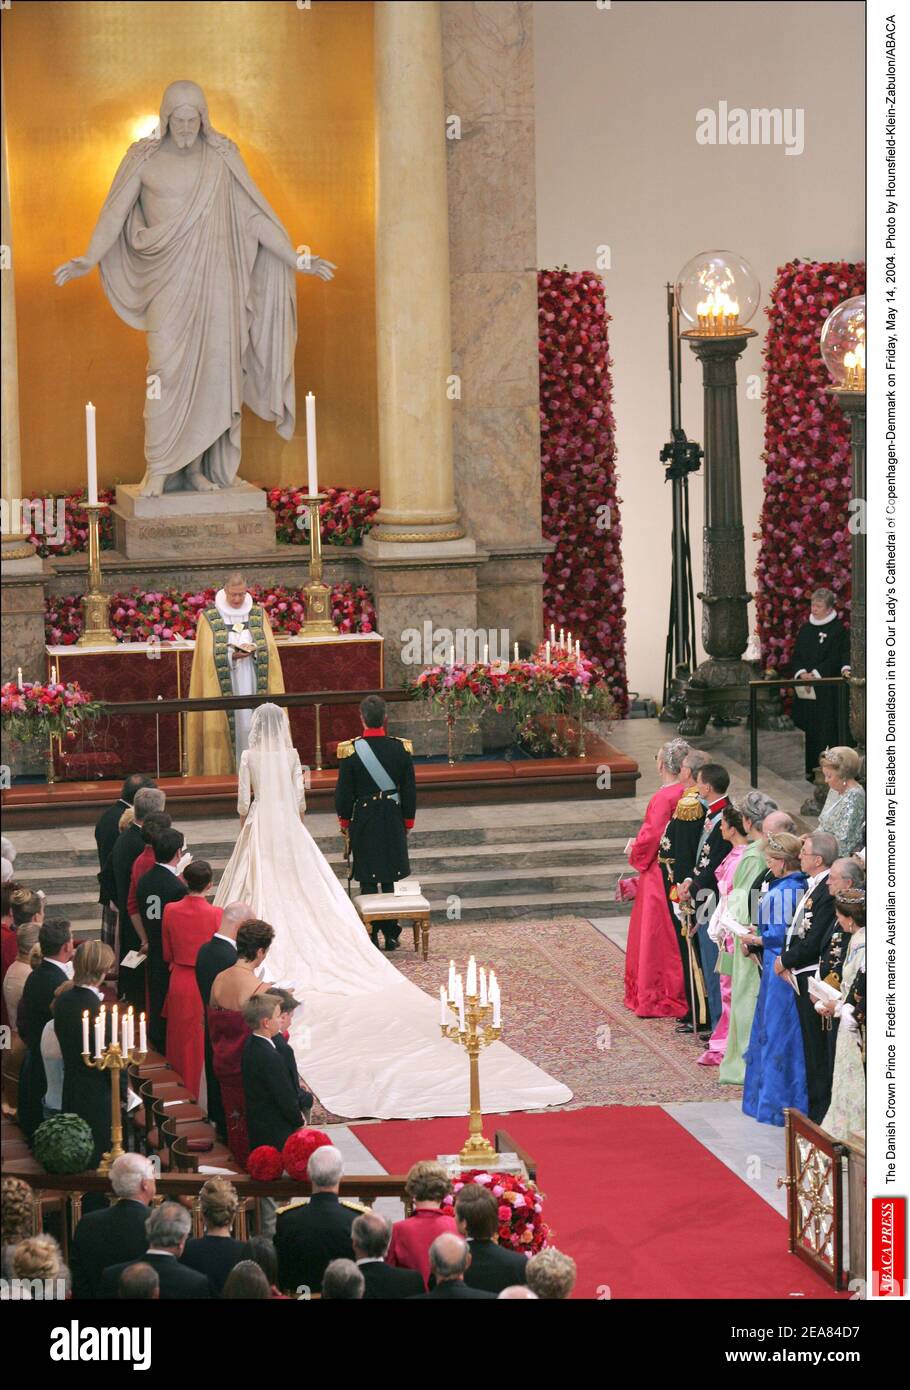 The Danish Crown Prince Frederik marries Australian commoner Mary Elisabeth Donaldson in the Our Lady's Cathedral of Copenhagen-Denmark on Friday, May 14, 2004. Photo by Hounsfield-Klein-Zabulon/ABACA Stock Photo